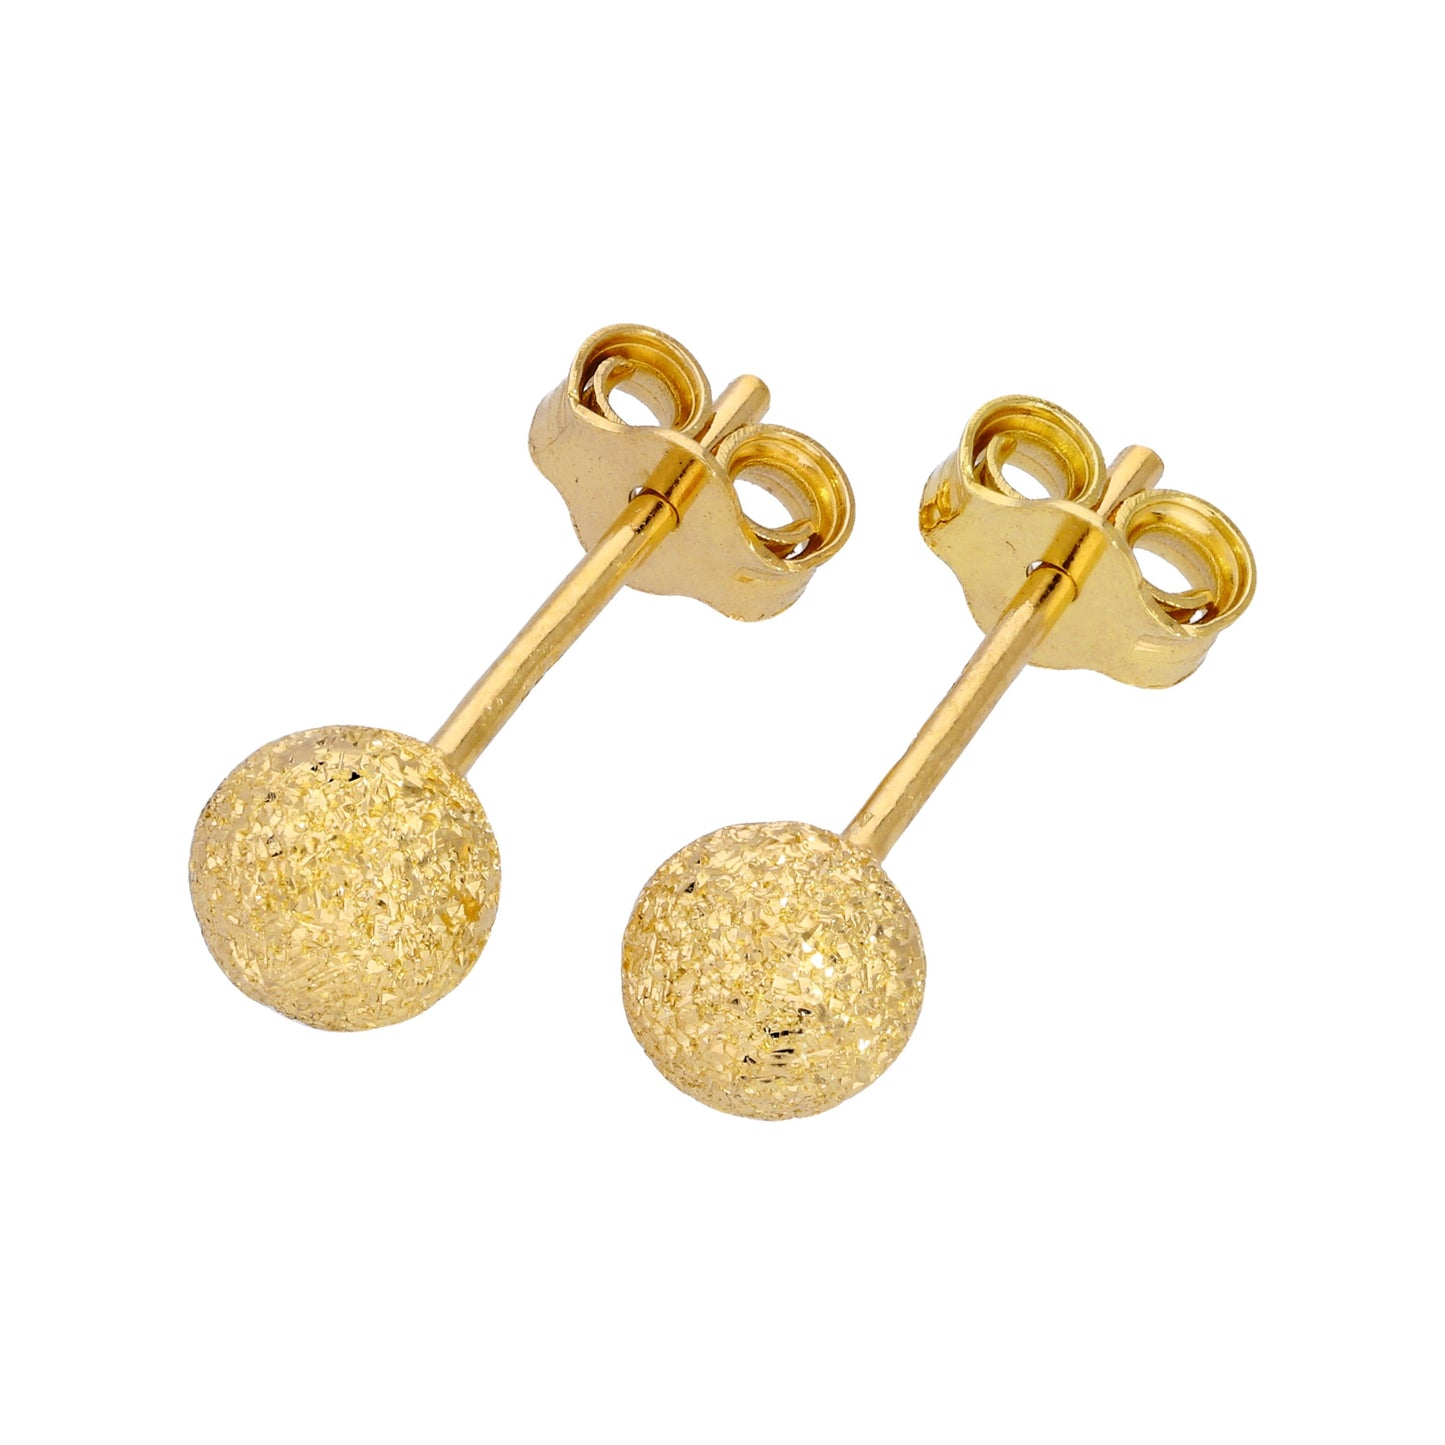 Gold Plated Frosted Sterling Silver Ball Stud Earrings 3-8mm